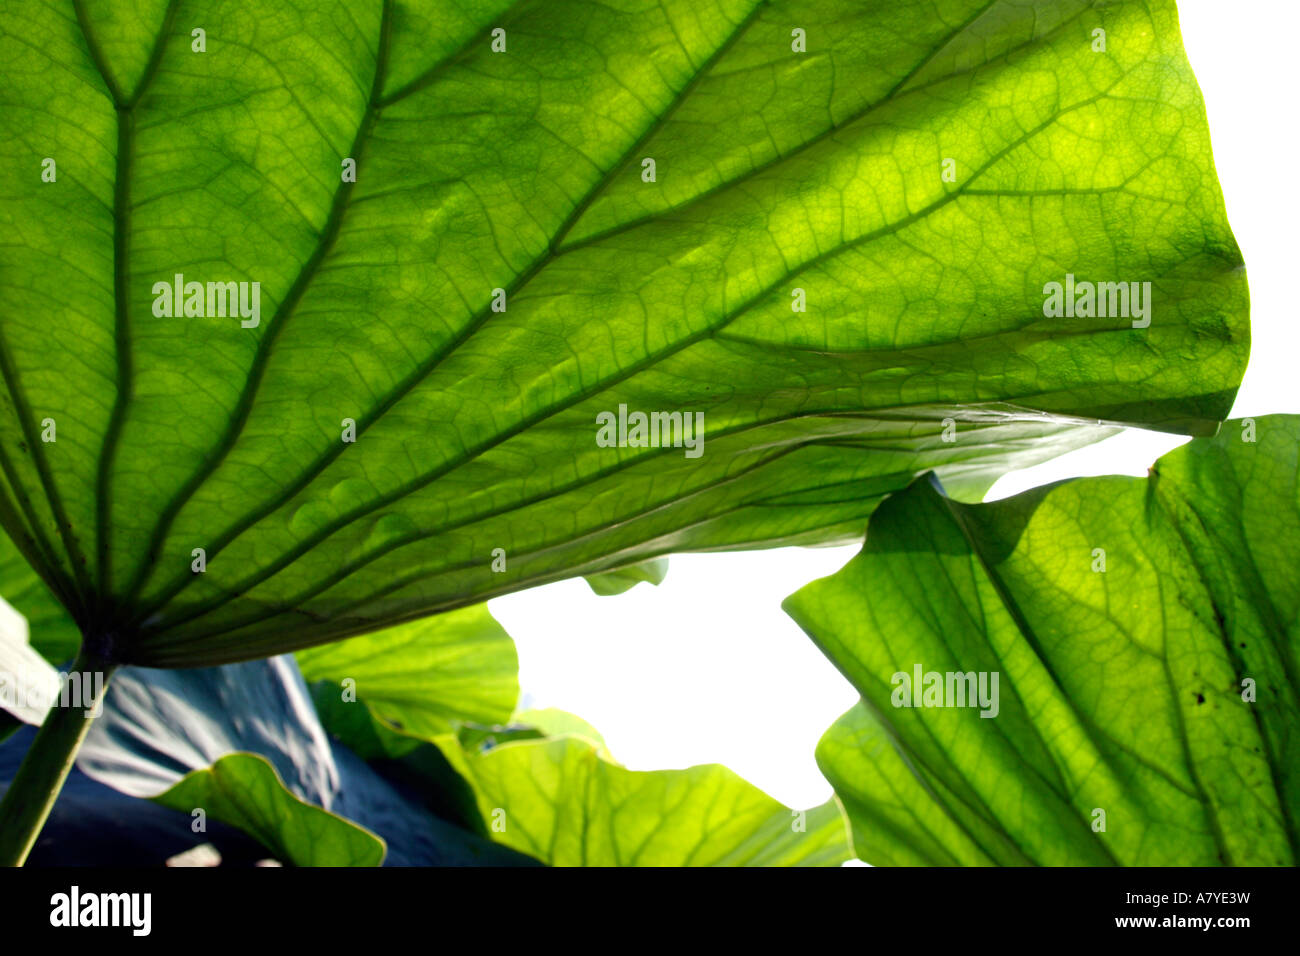 Leaf photographed from the side opposite to the sun to enhance the texture. Lotus flower: Nelumbo speciosum Stock Photo